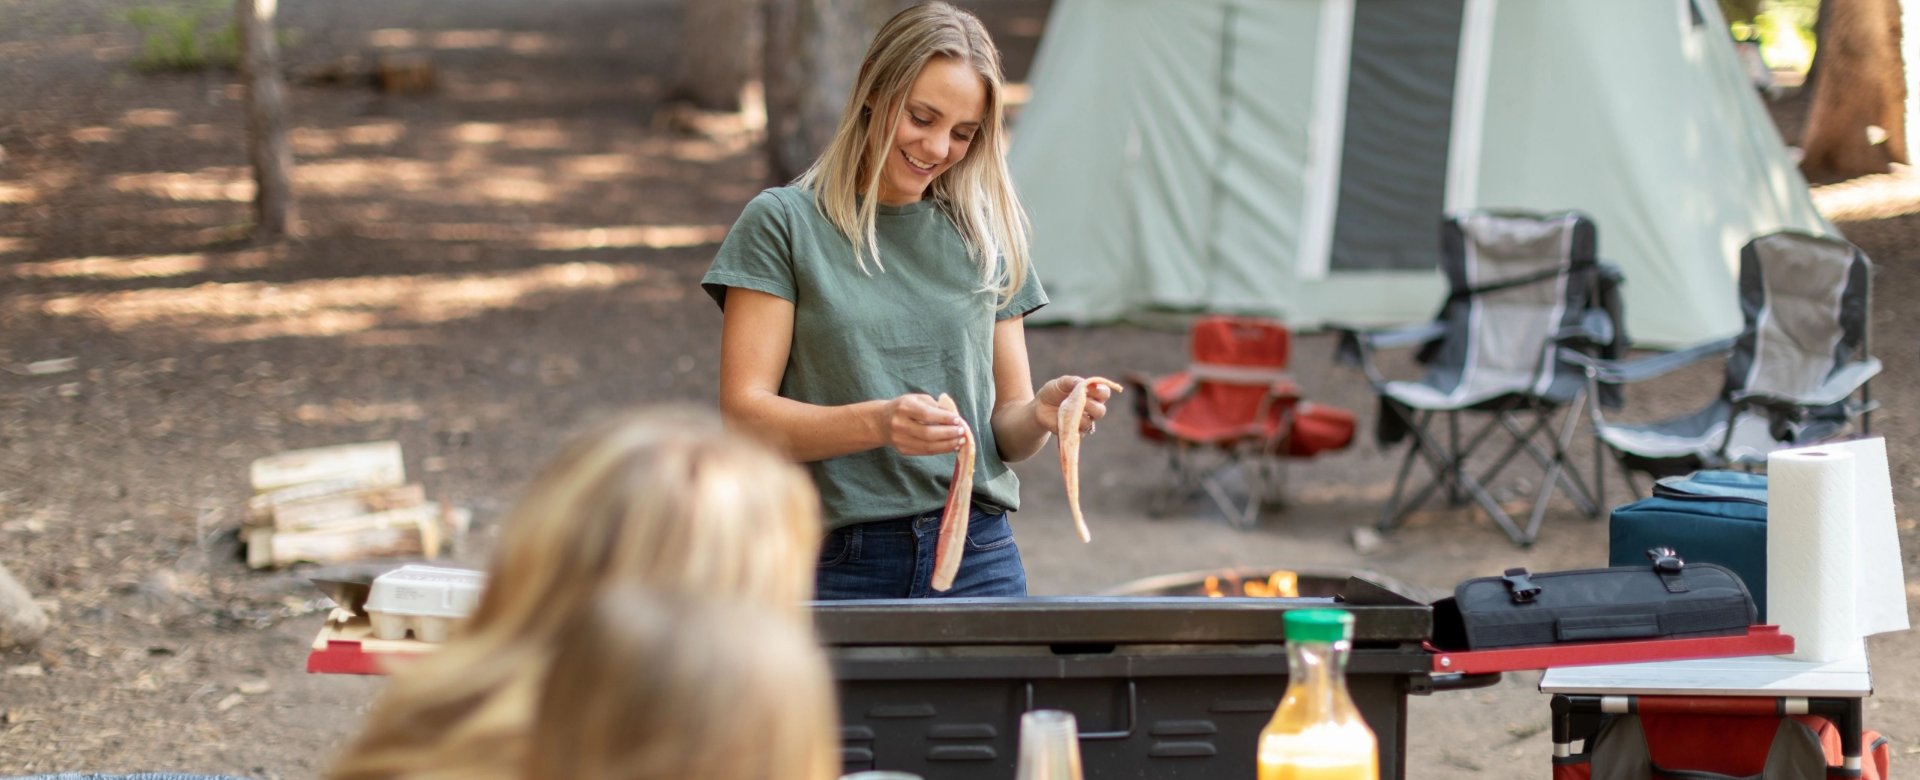 Campsite Cooking Hacks for the Outdoor Junkie